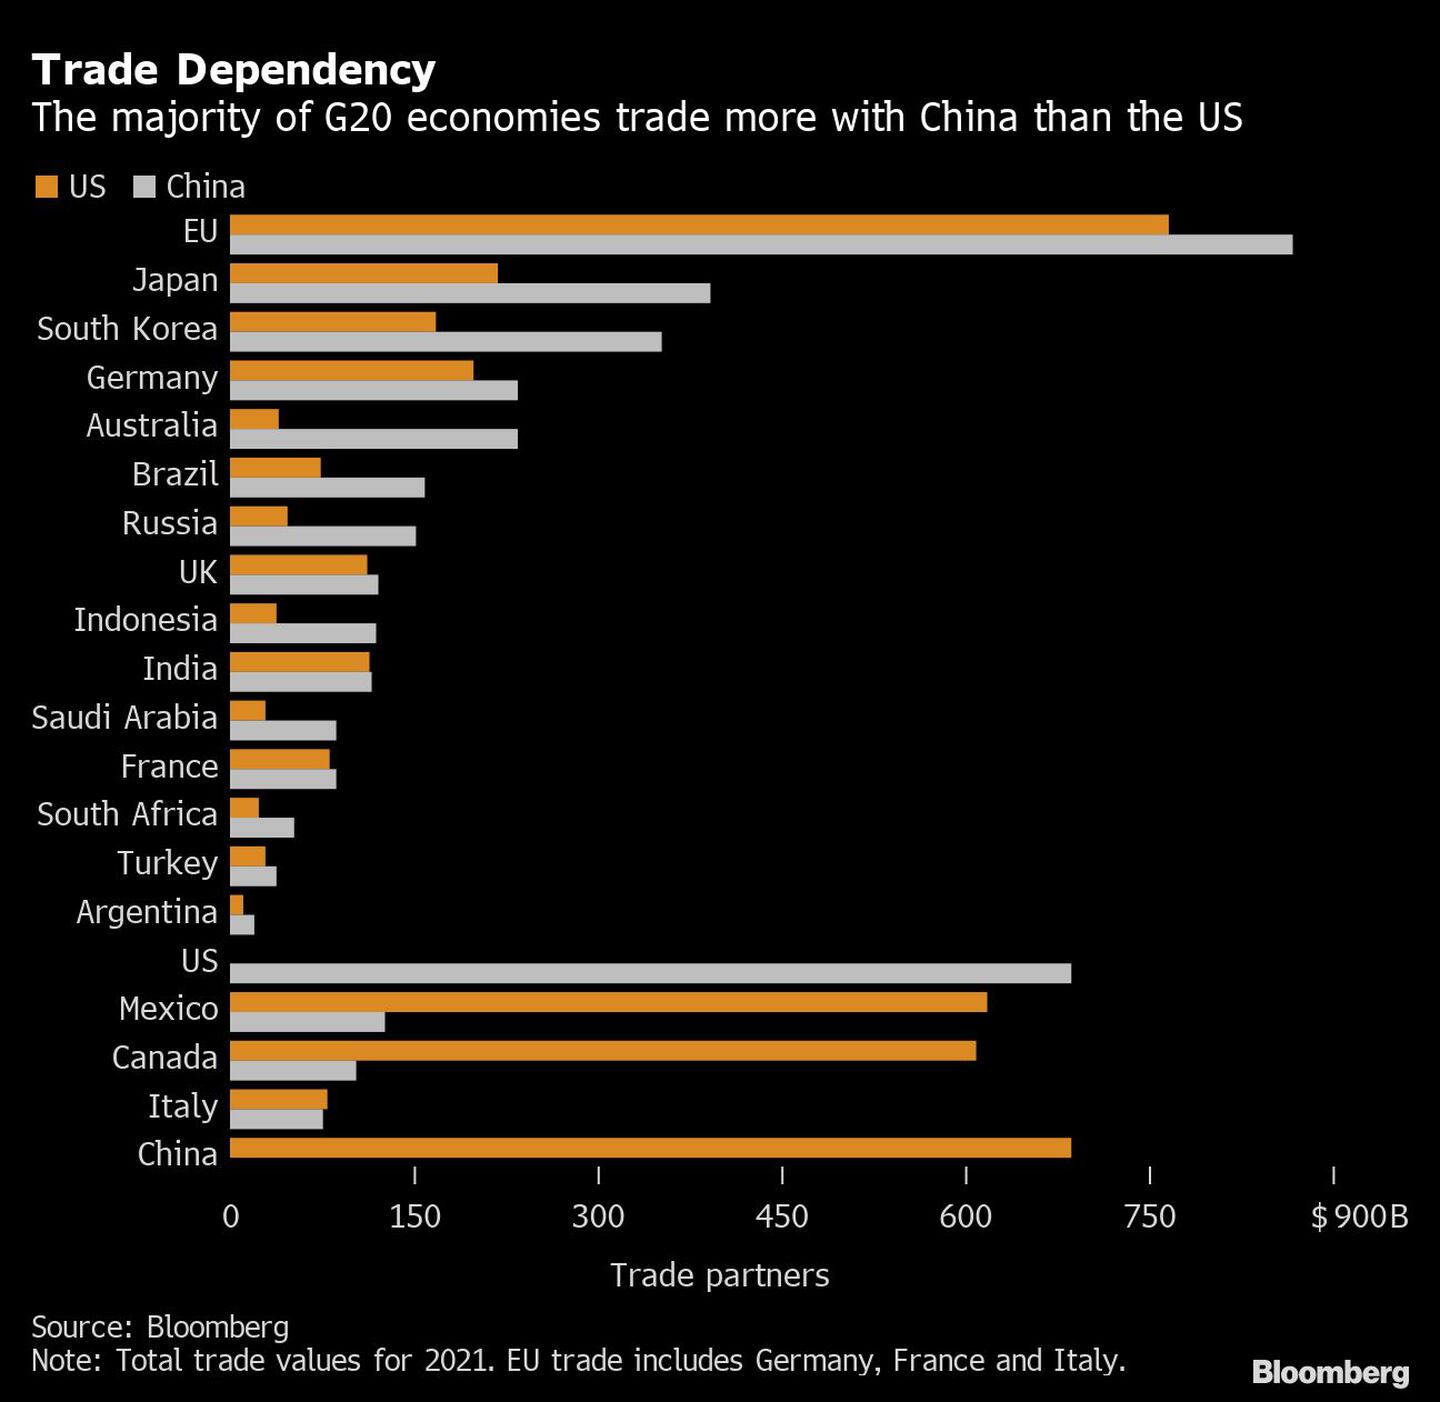 Trade Dependency | The majority of G20 economies trade more with China than the USdfd